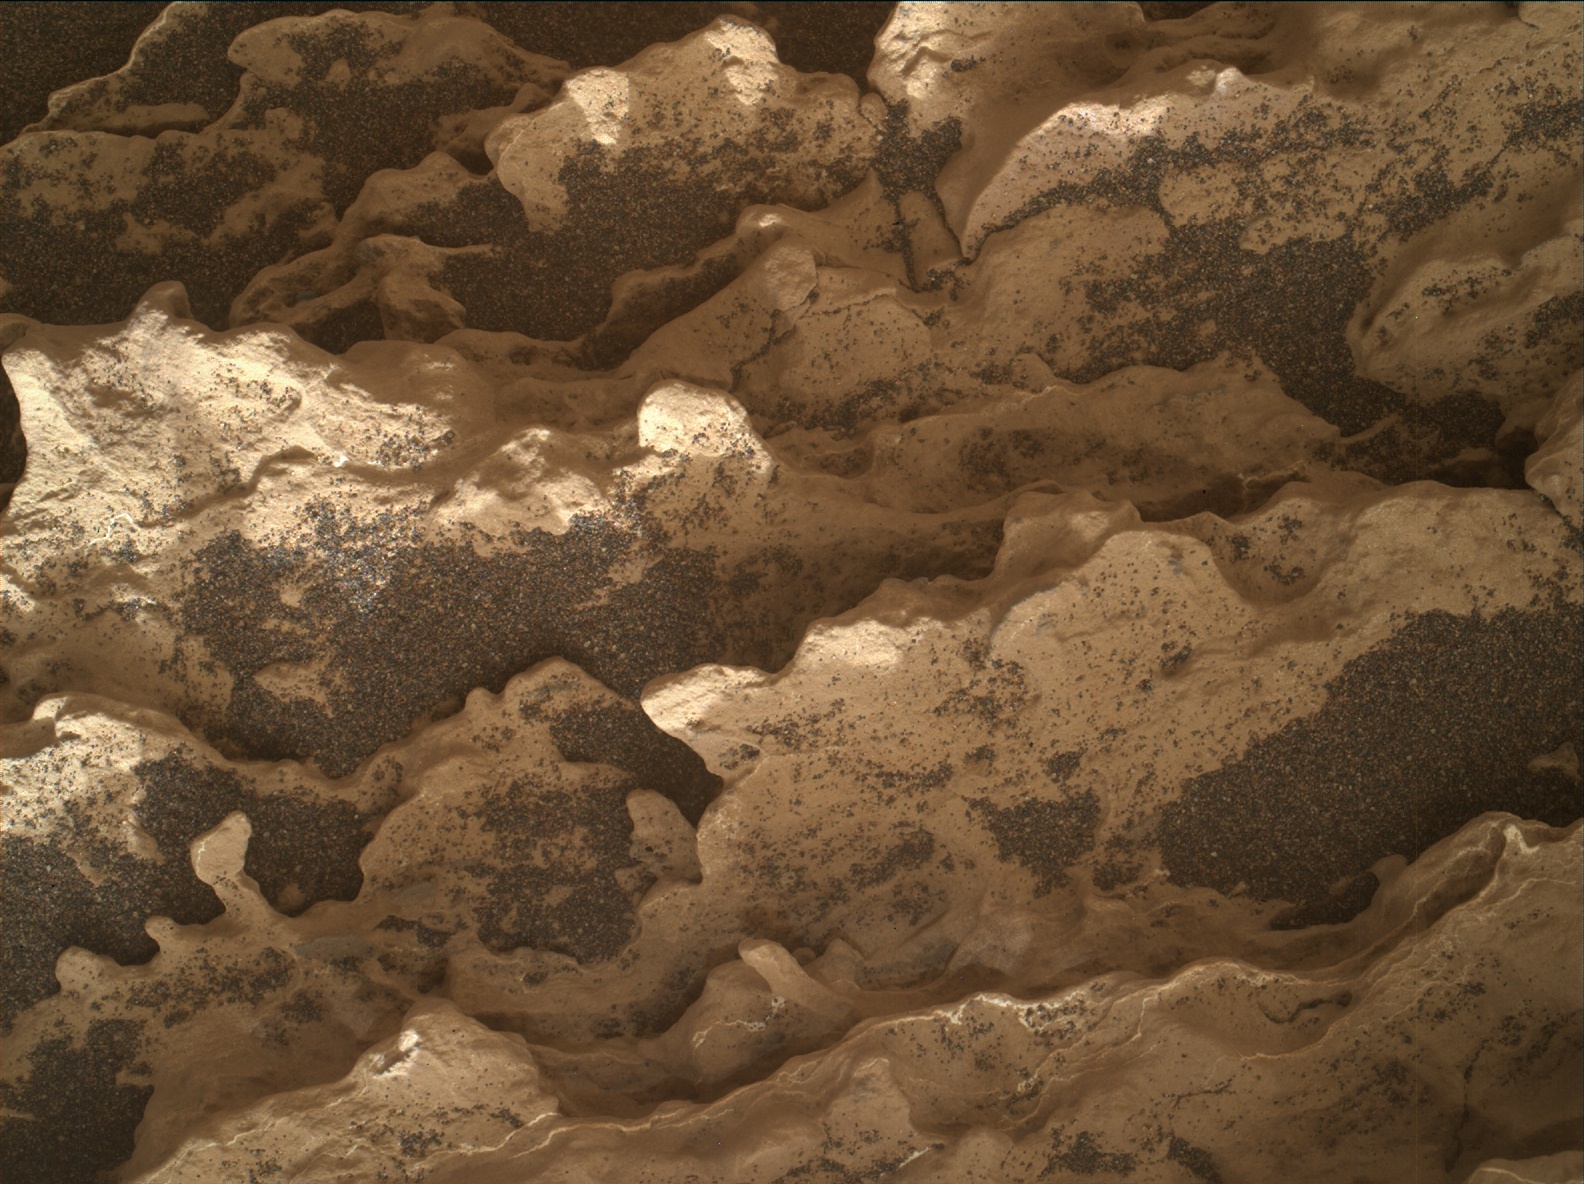 Nasa's Mars rover Curiosity acquired this image using its Mars Hand Lens Imager (MAHLI) on Sol 1675